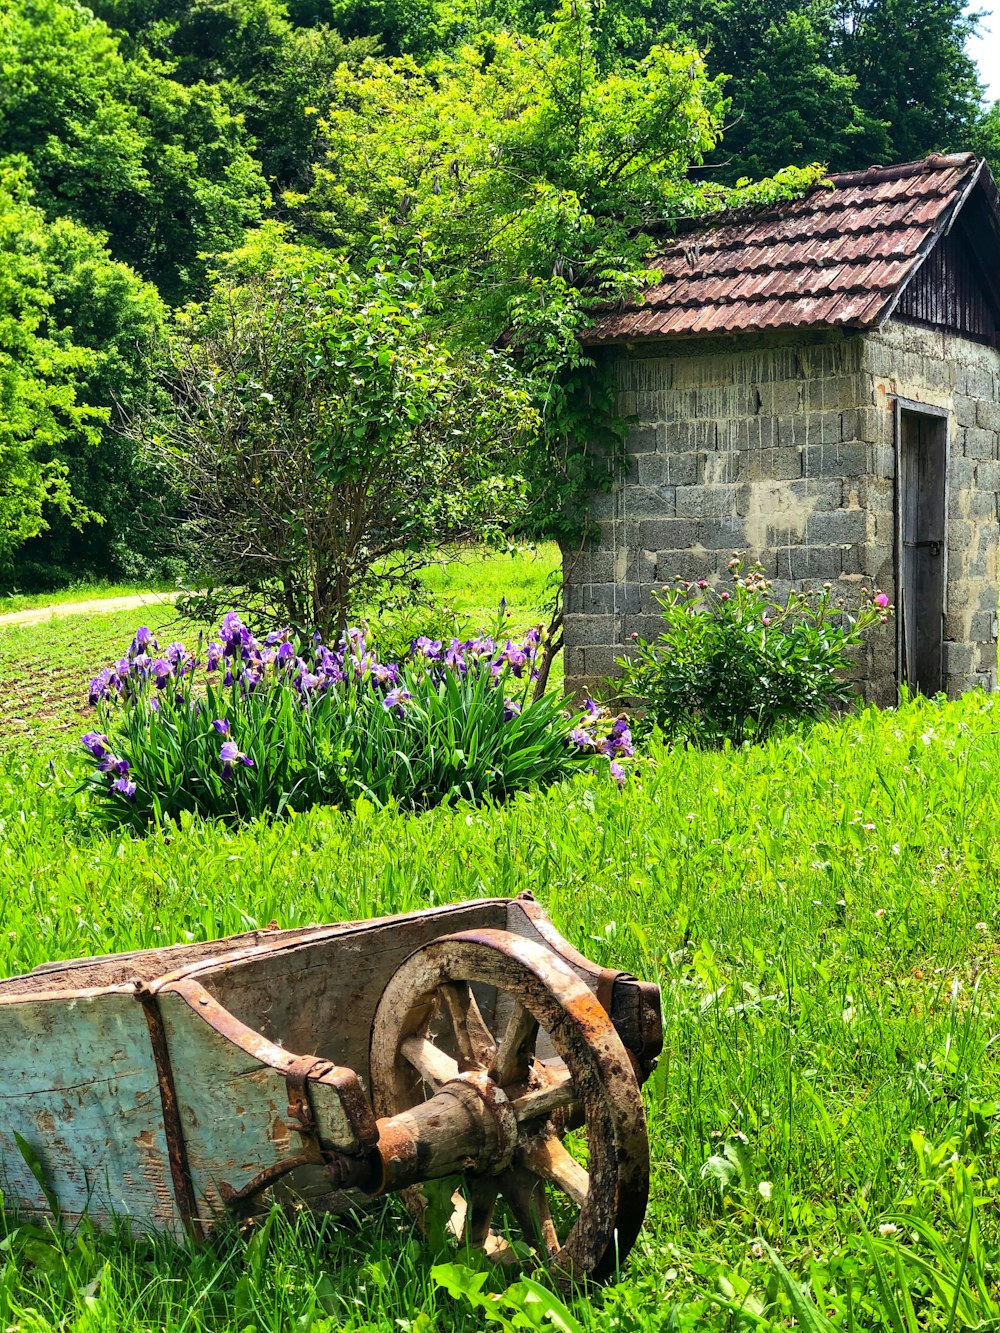 brown wooden cart on green grass field near green concrete house during daytime